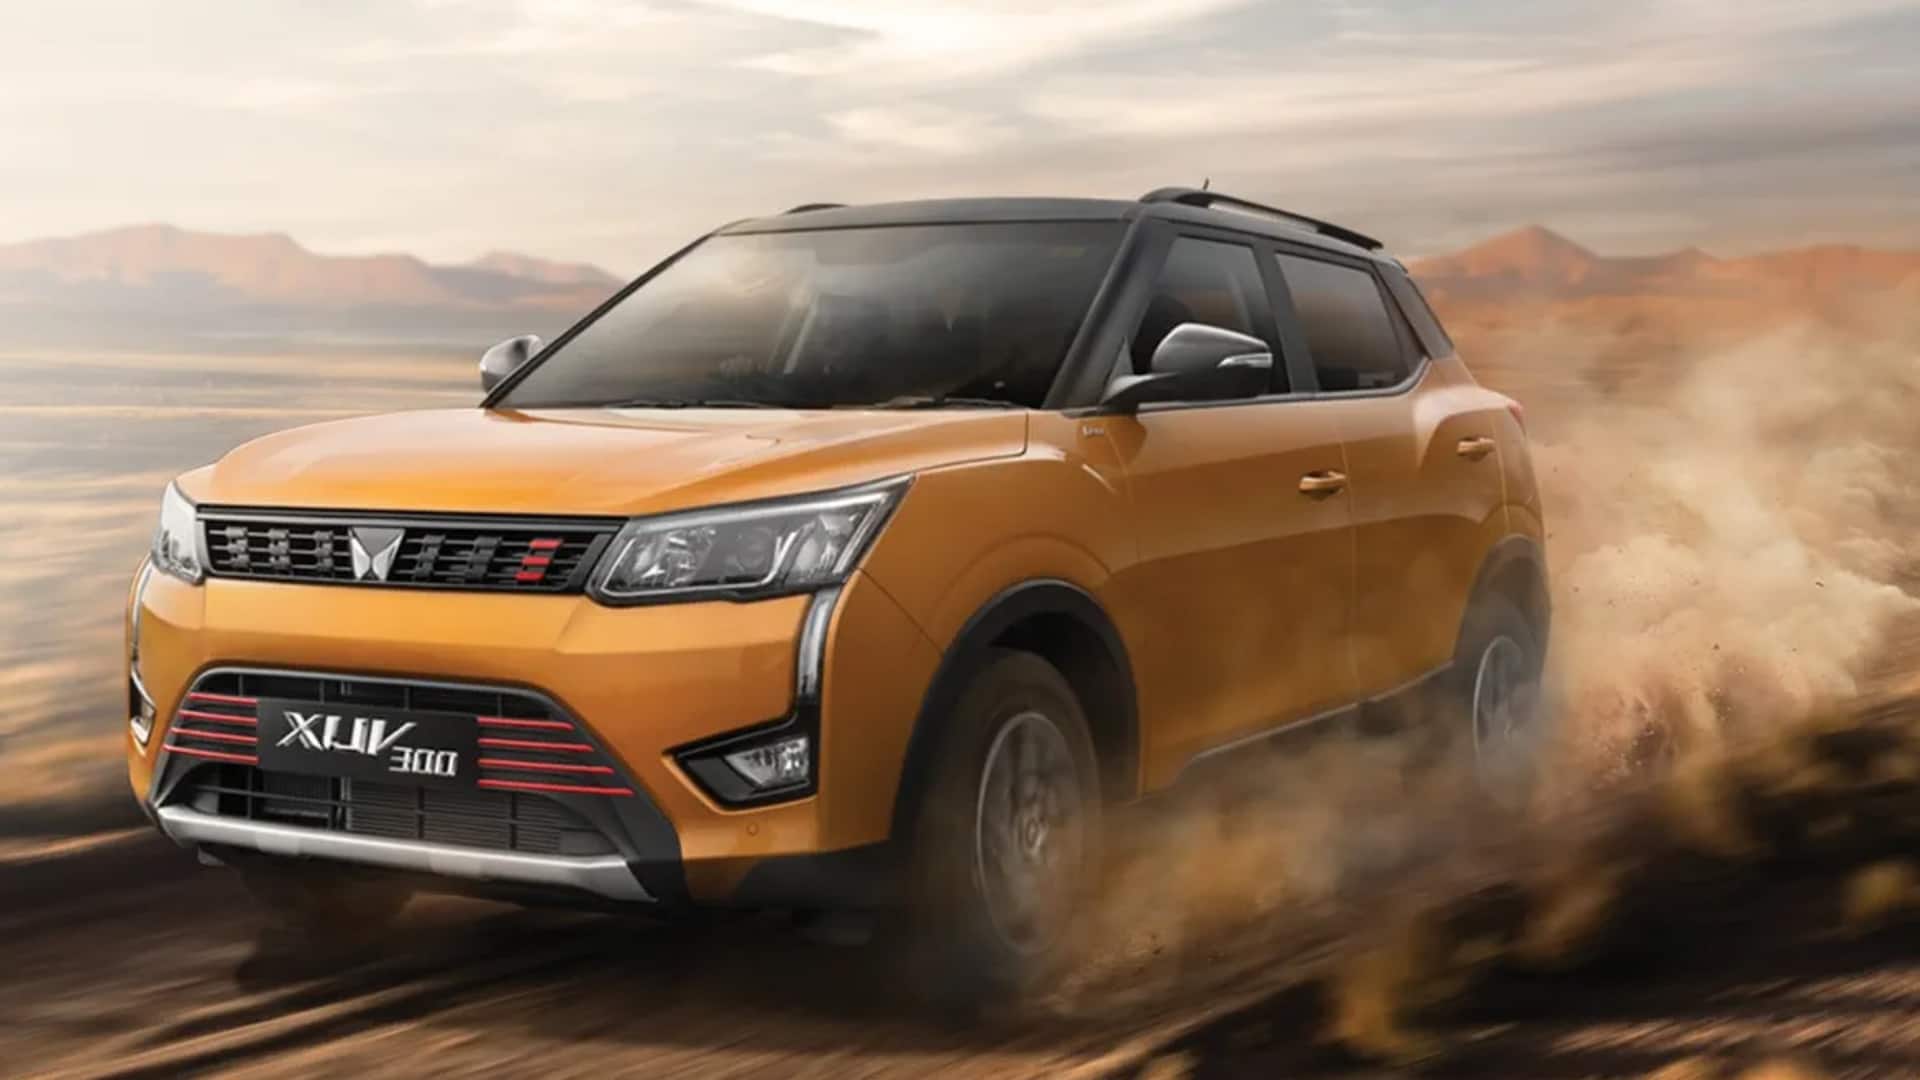 Mahindra XUV300 (facelift) in works: What we can expect